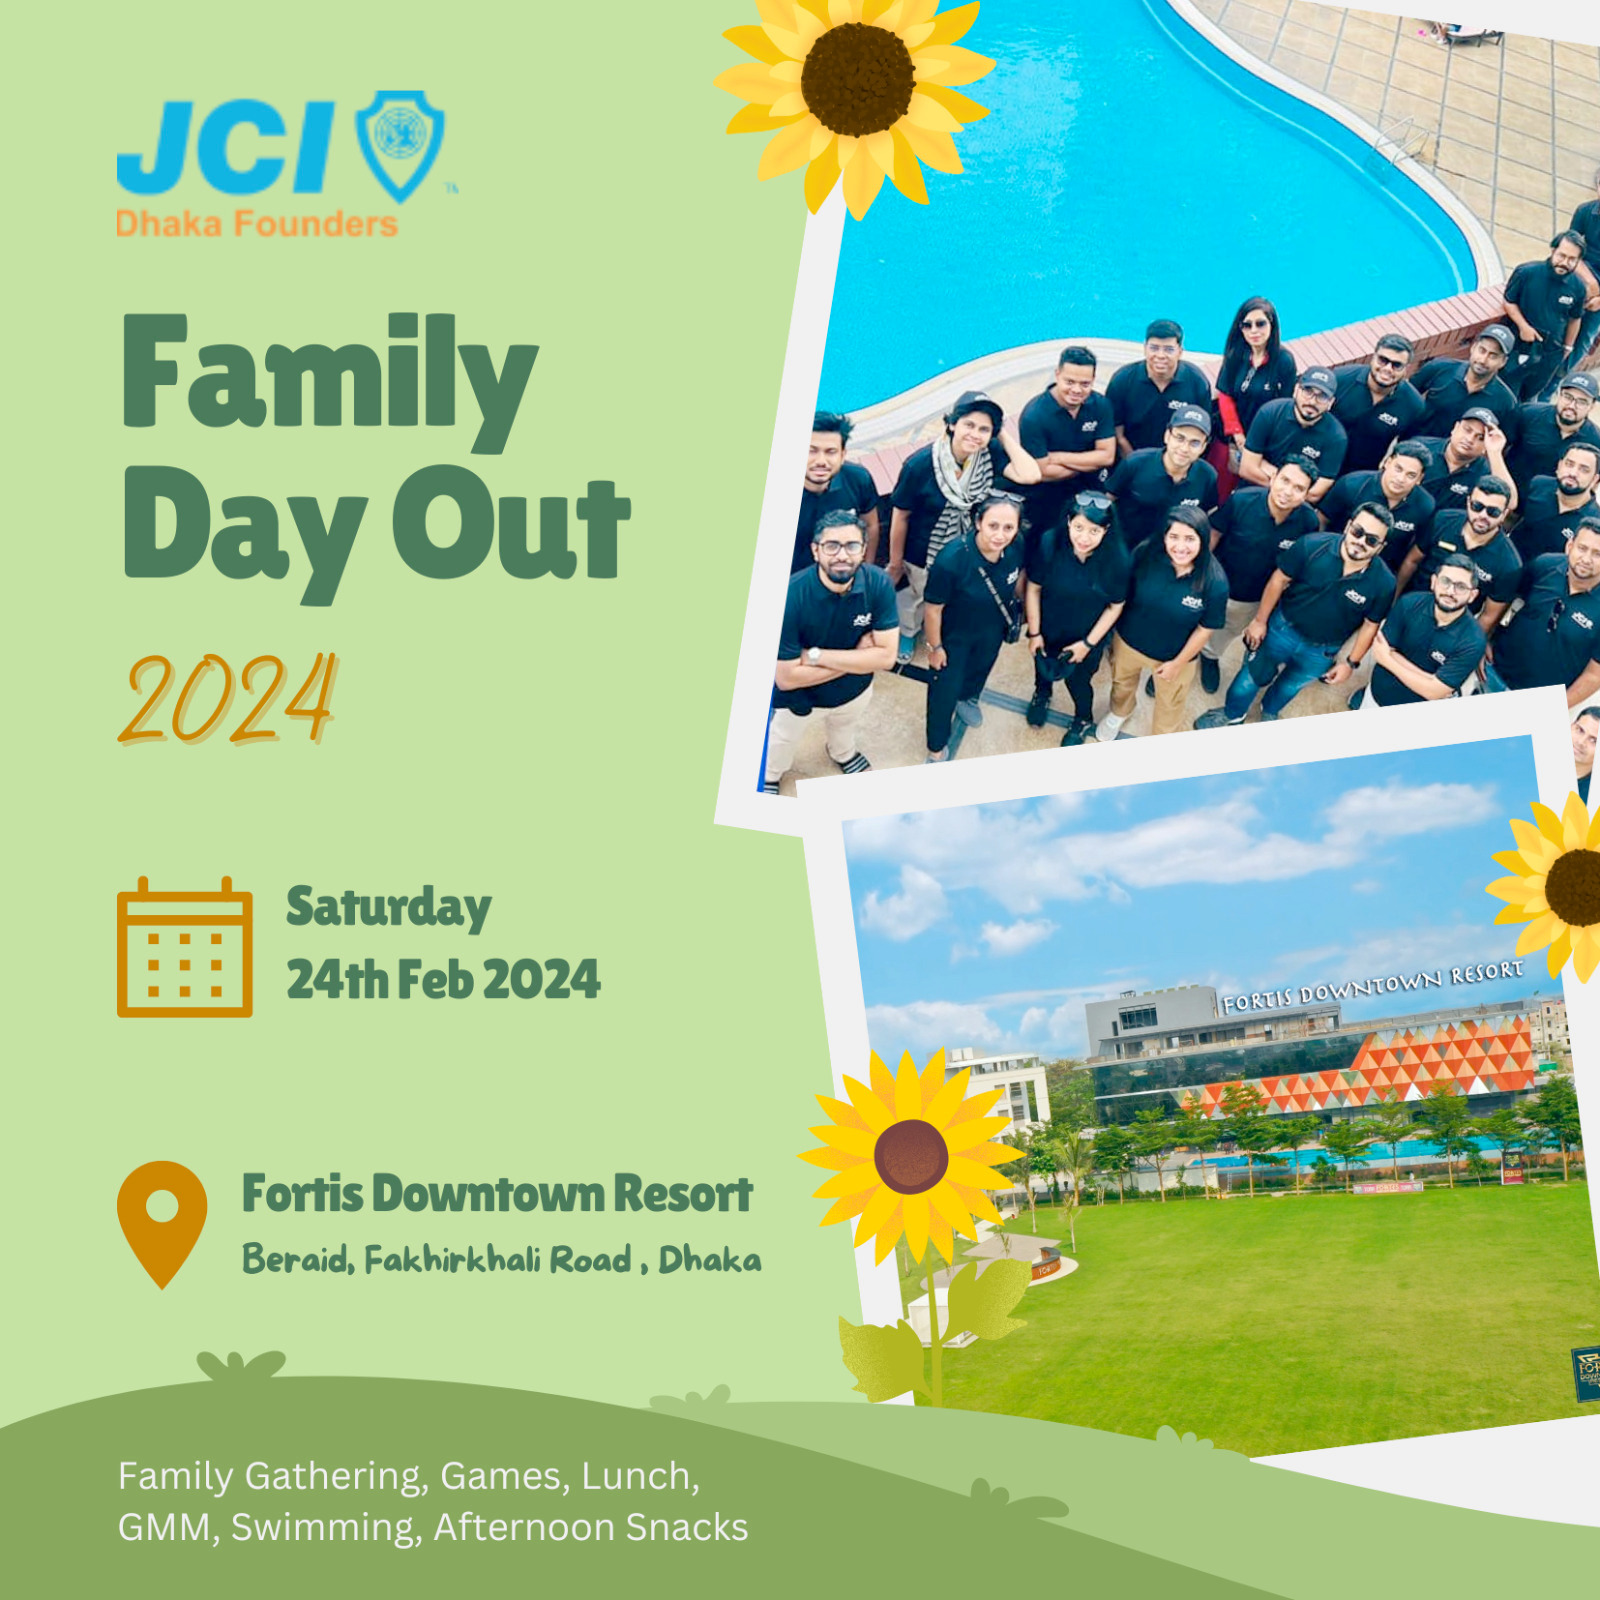 Family Day Out 2024: JCI Dhaka Founders